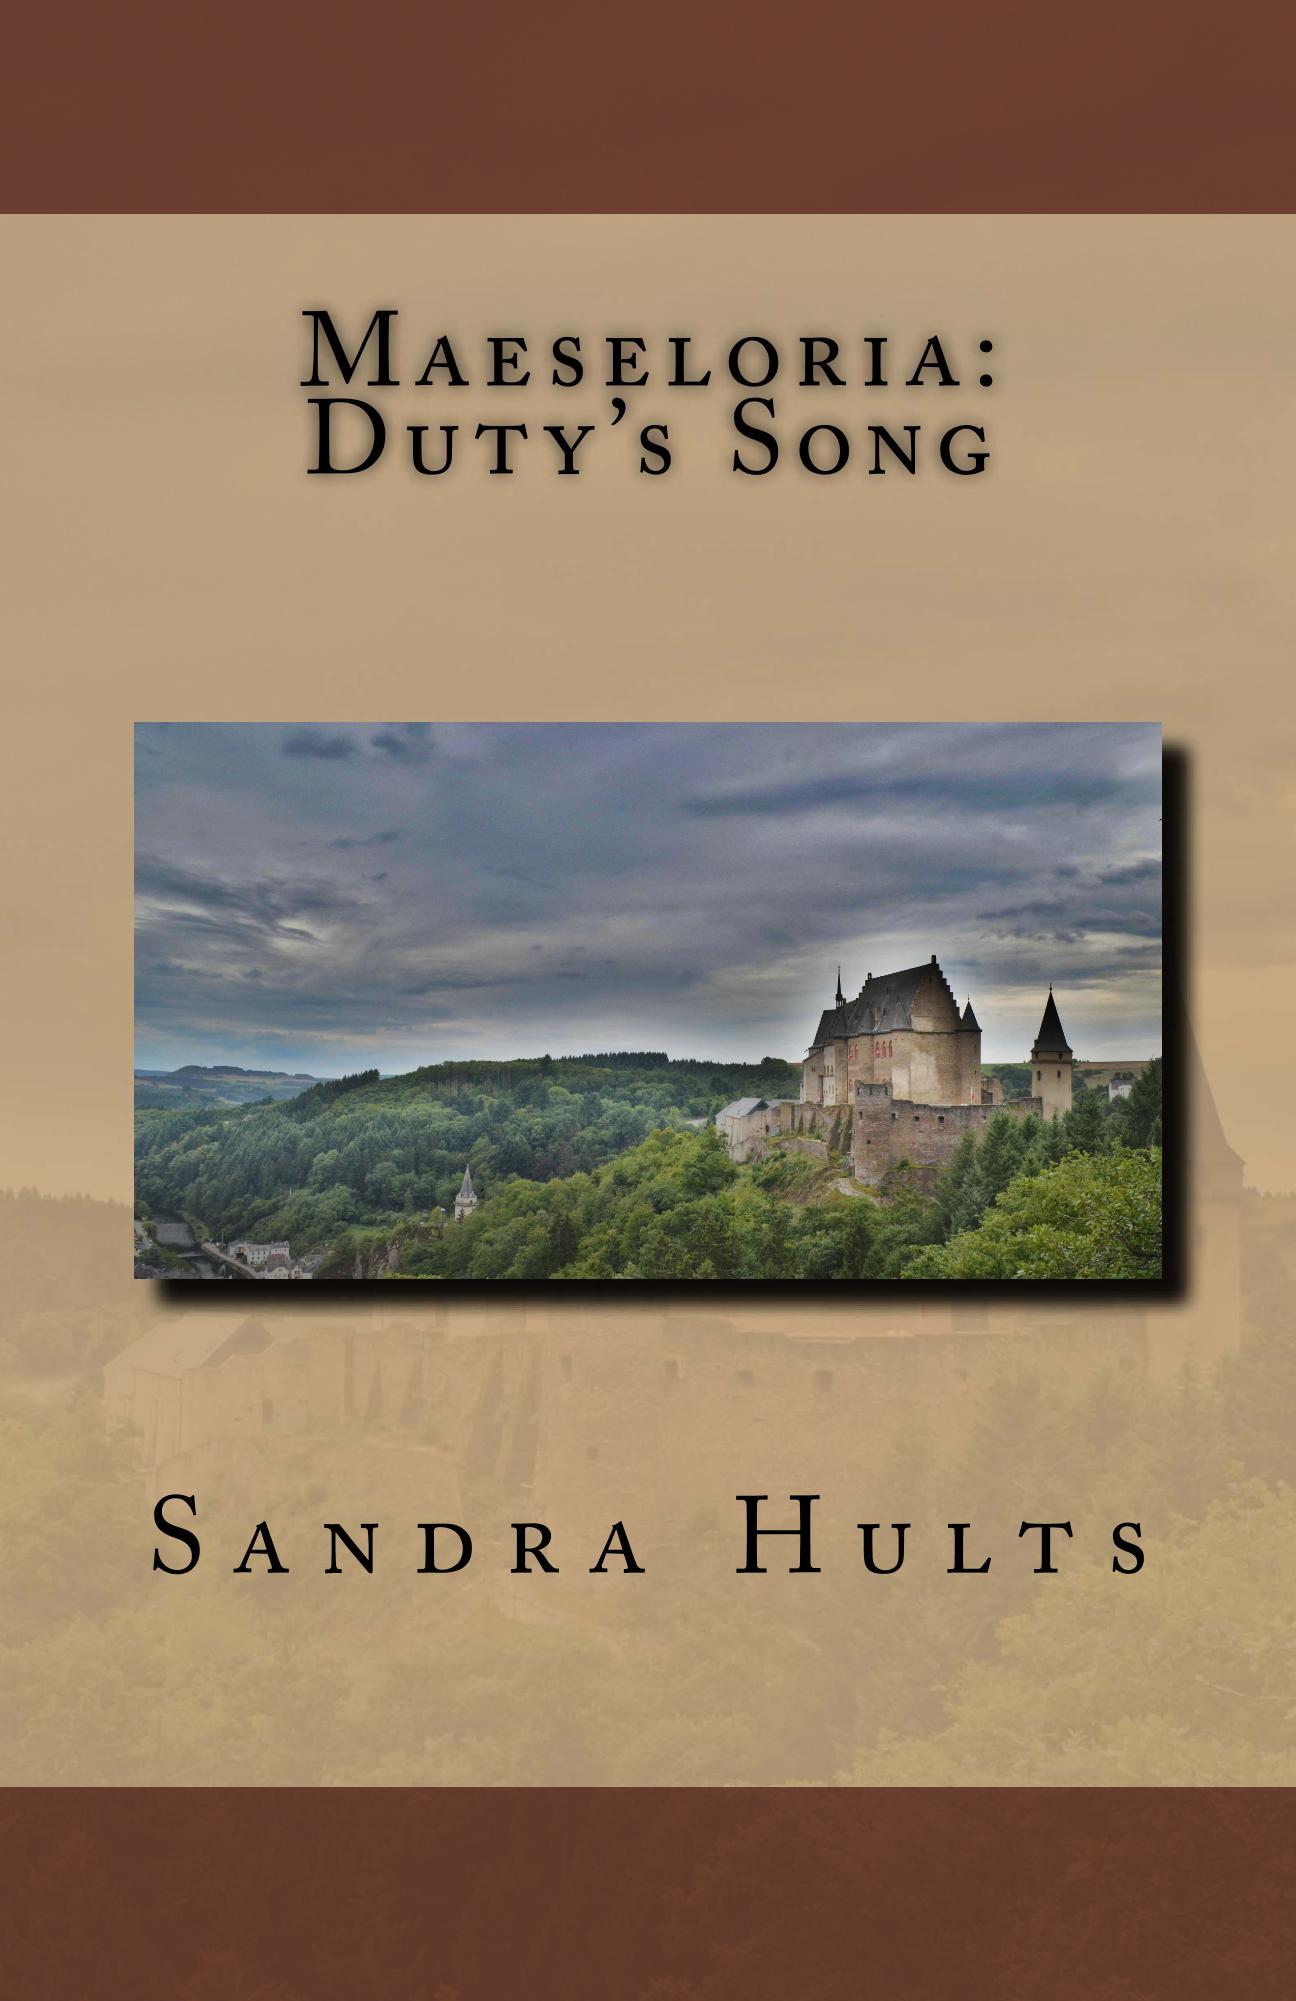 Maeseloria: Duty's Song